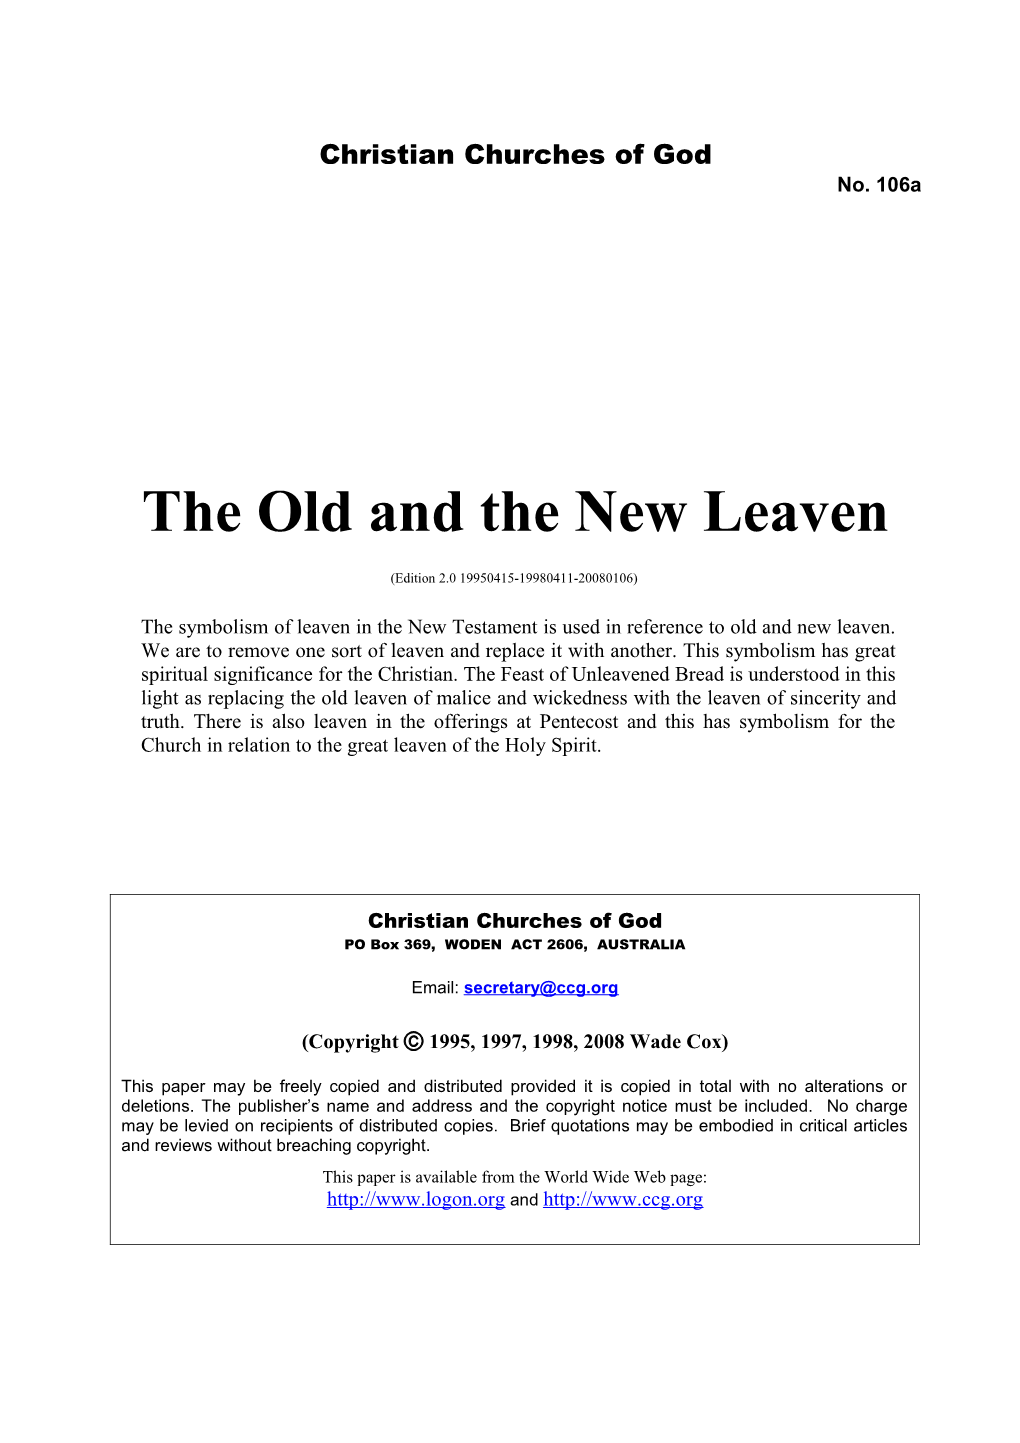 The Old and the New Leaven (No. 106A)